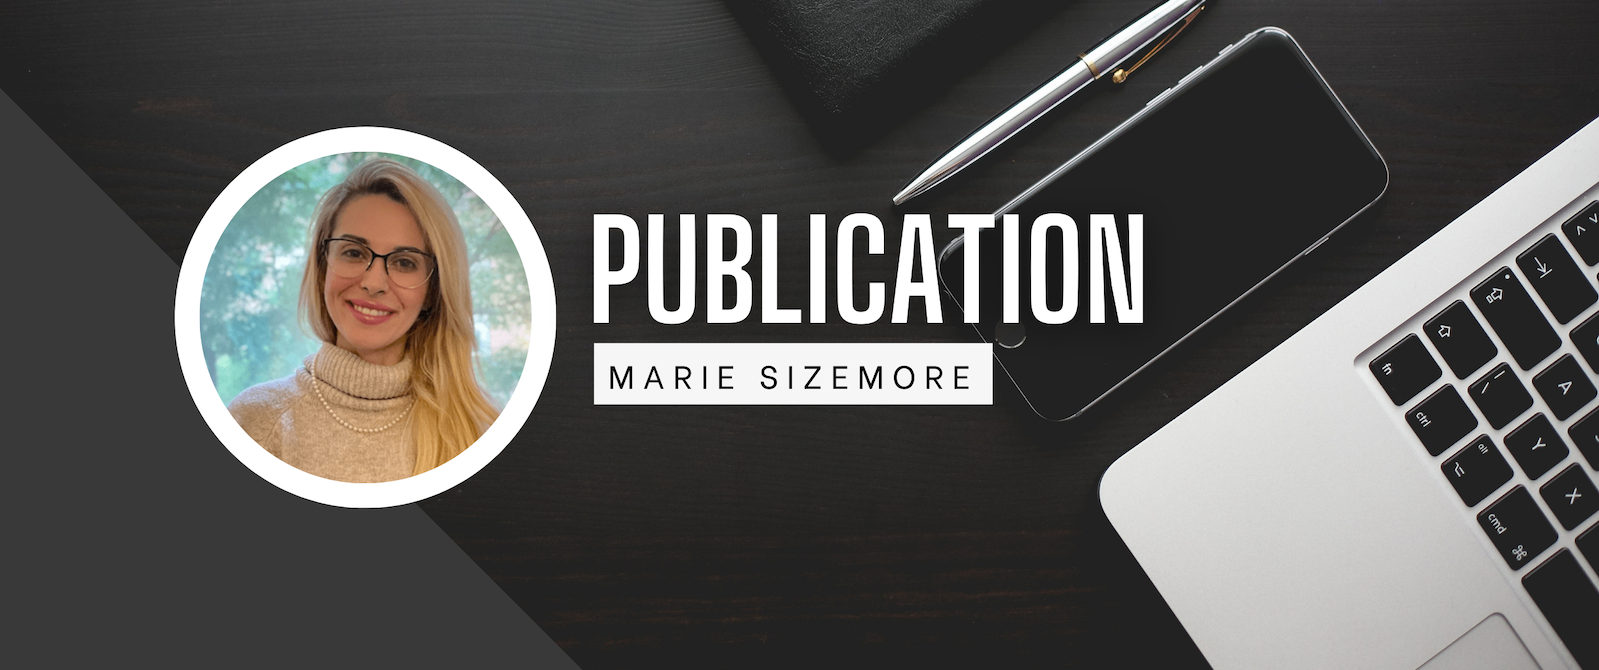 Marie Sizemore publications